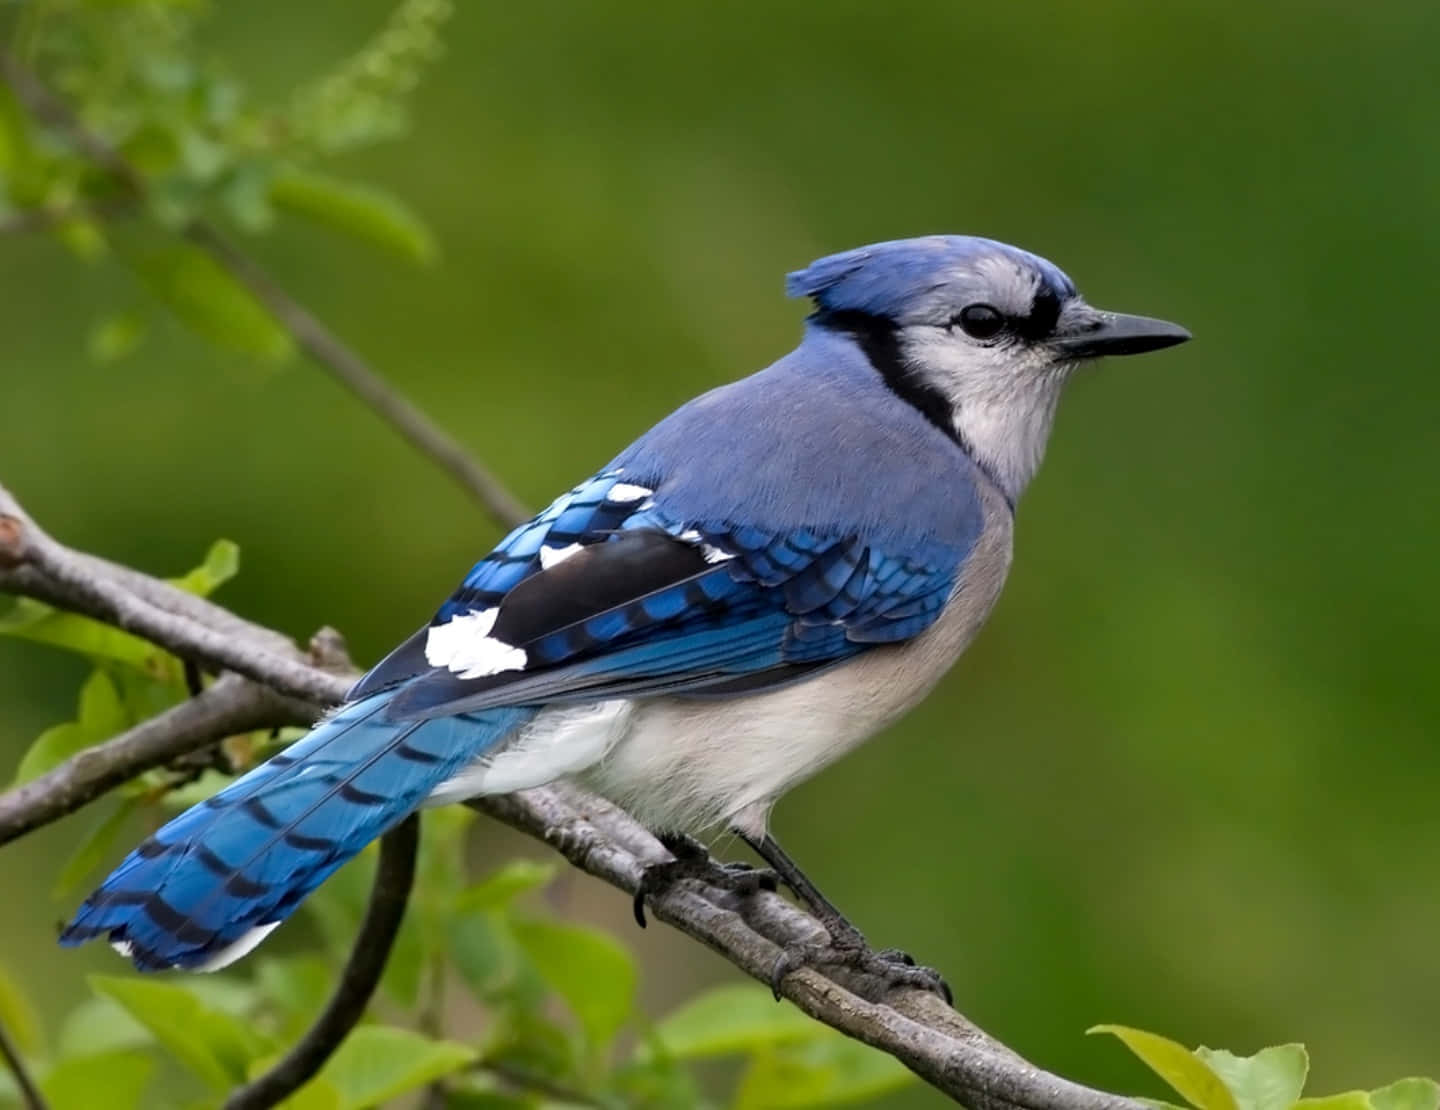 A Blue Jay stands out against a lush green forest backdrop